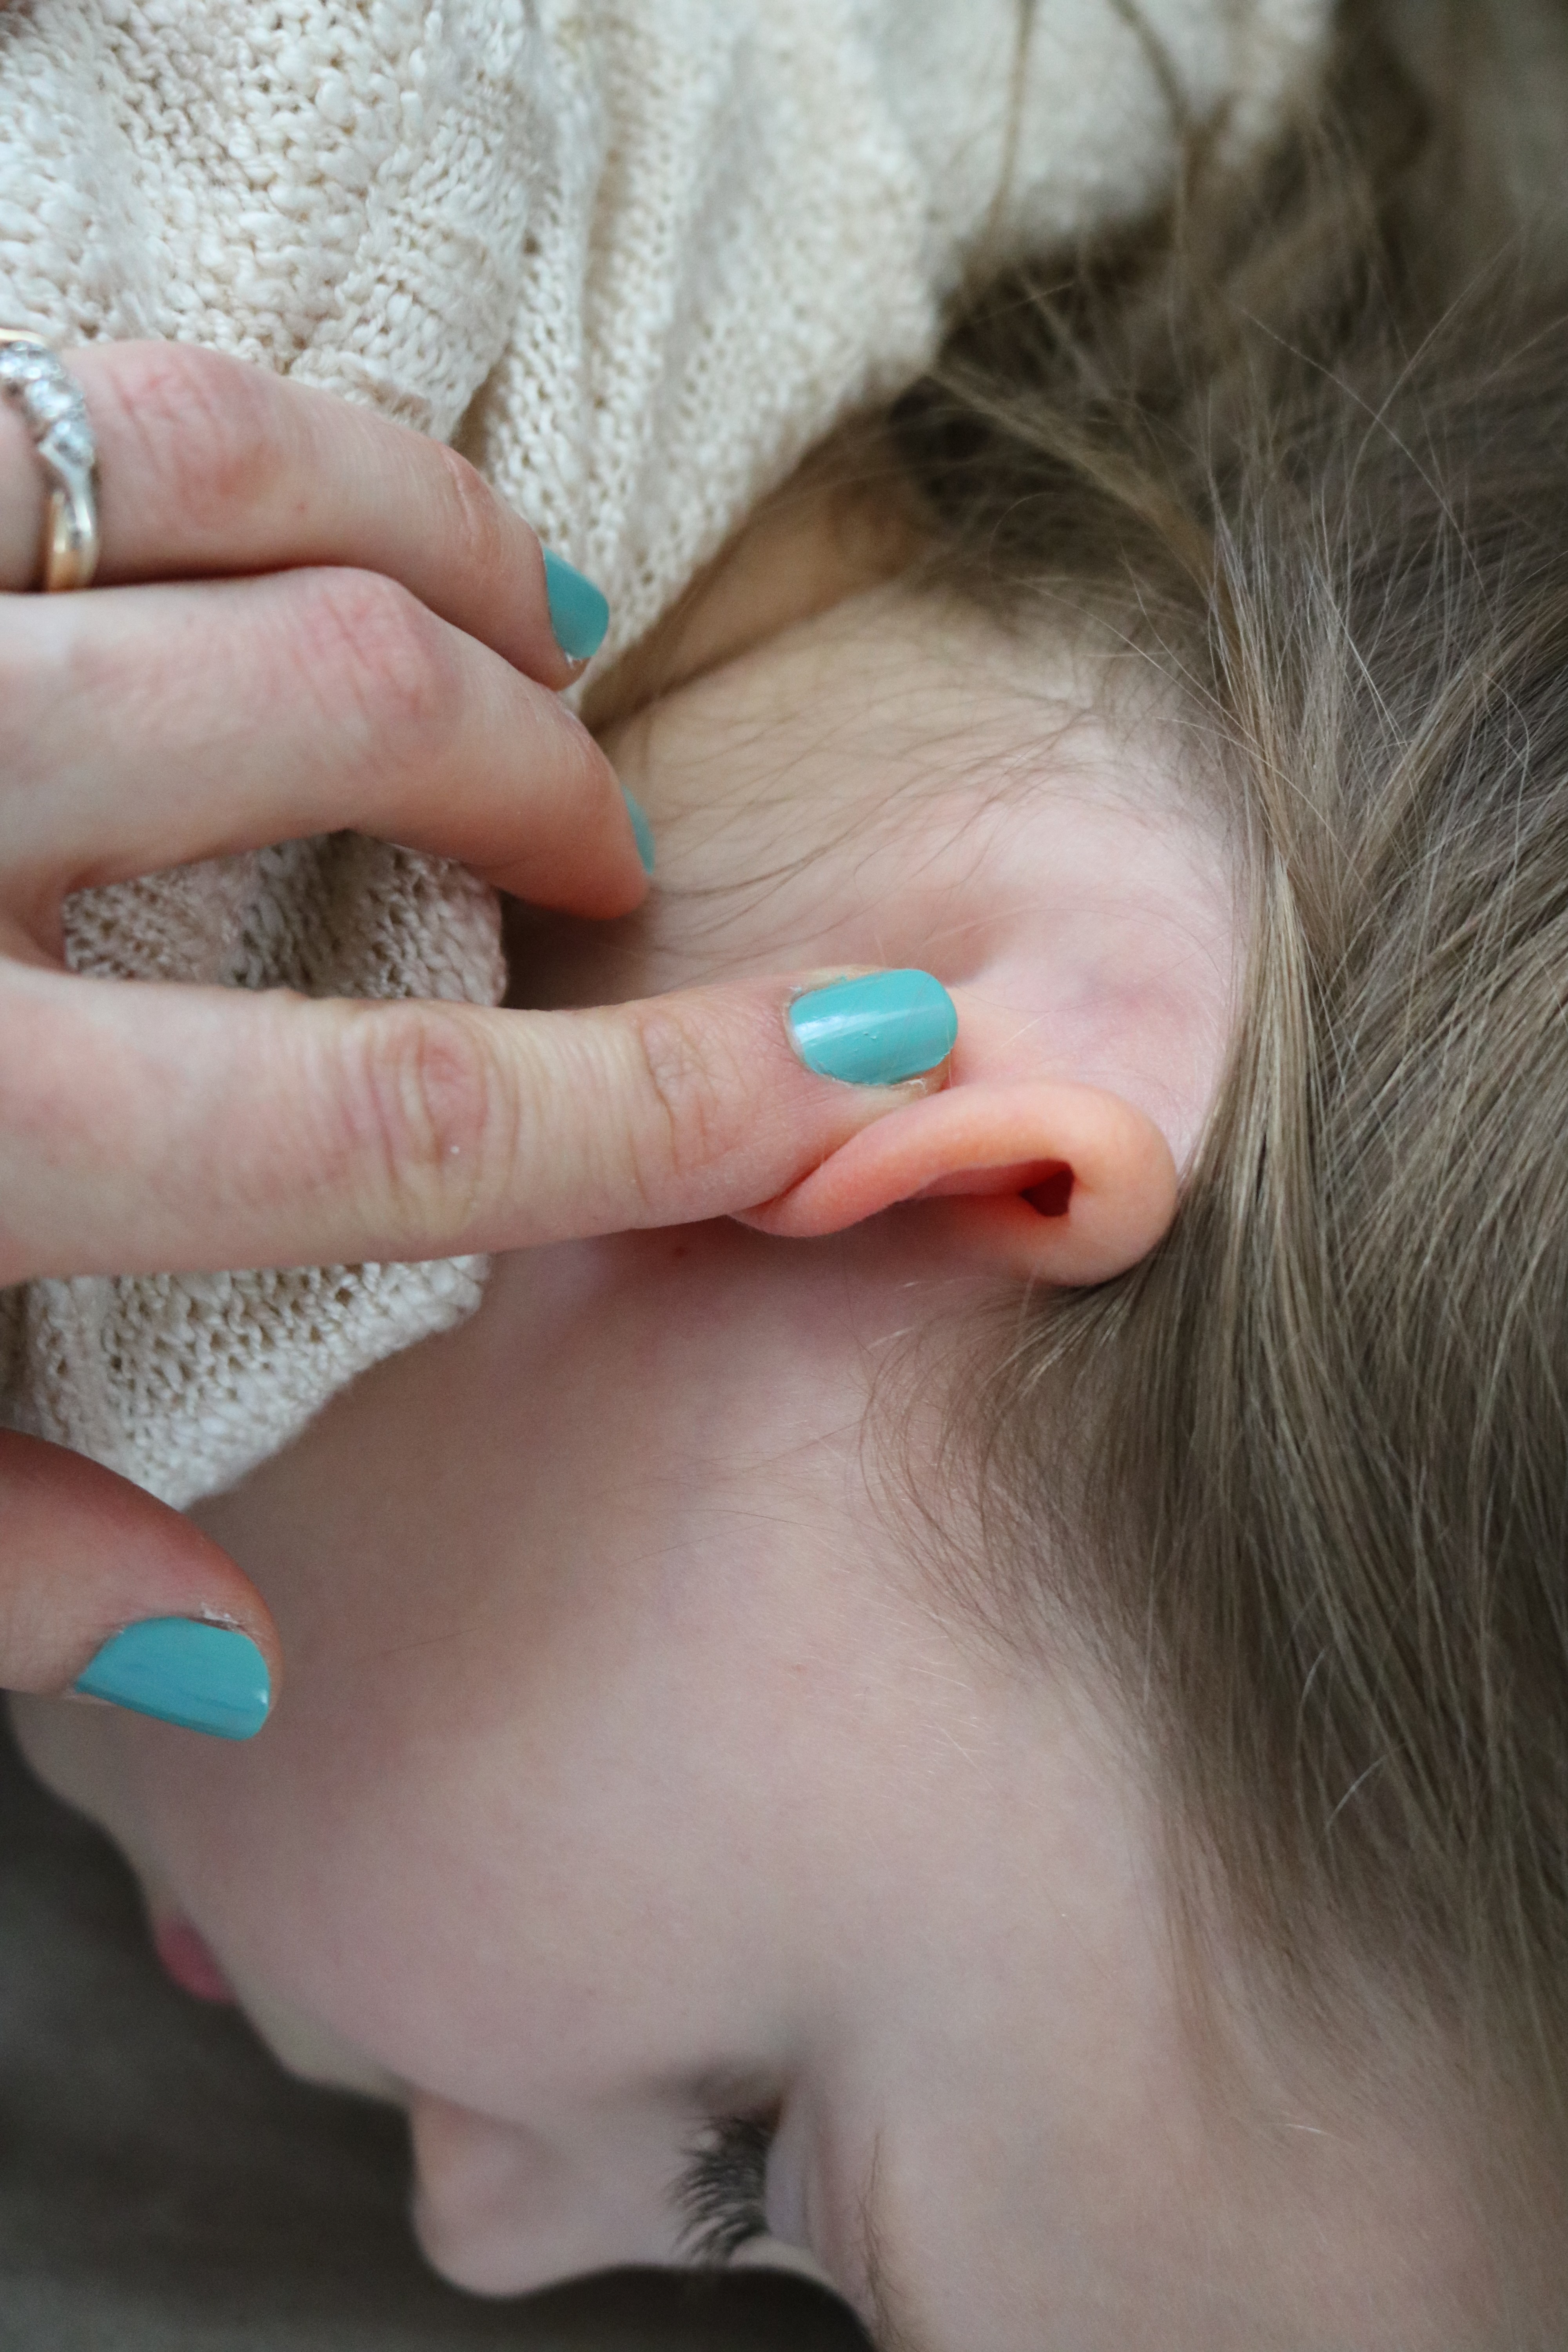 Bending ear forward to check for ear infection or earache in infants and/or babies.